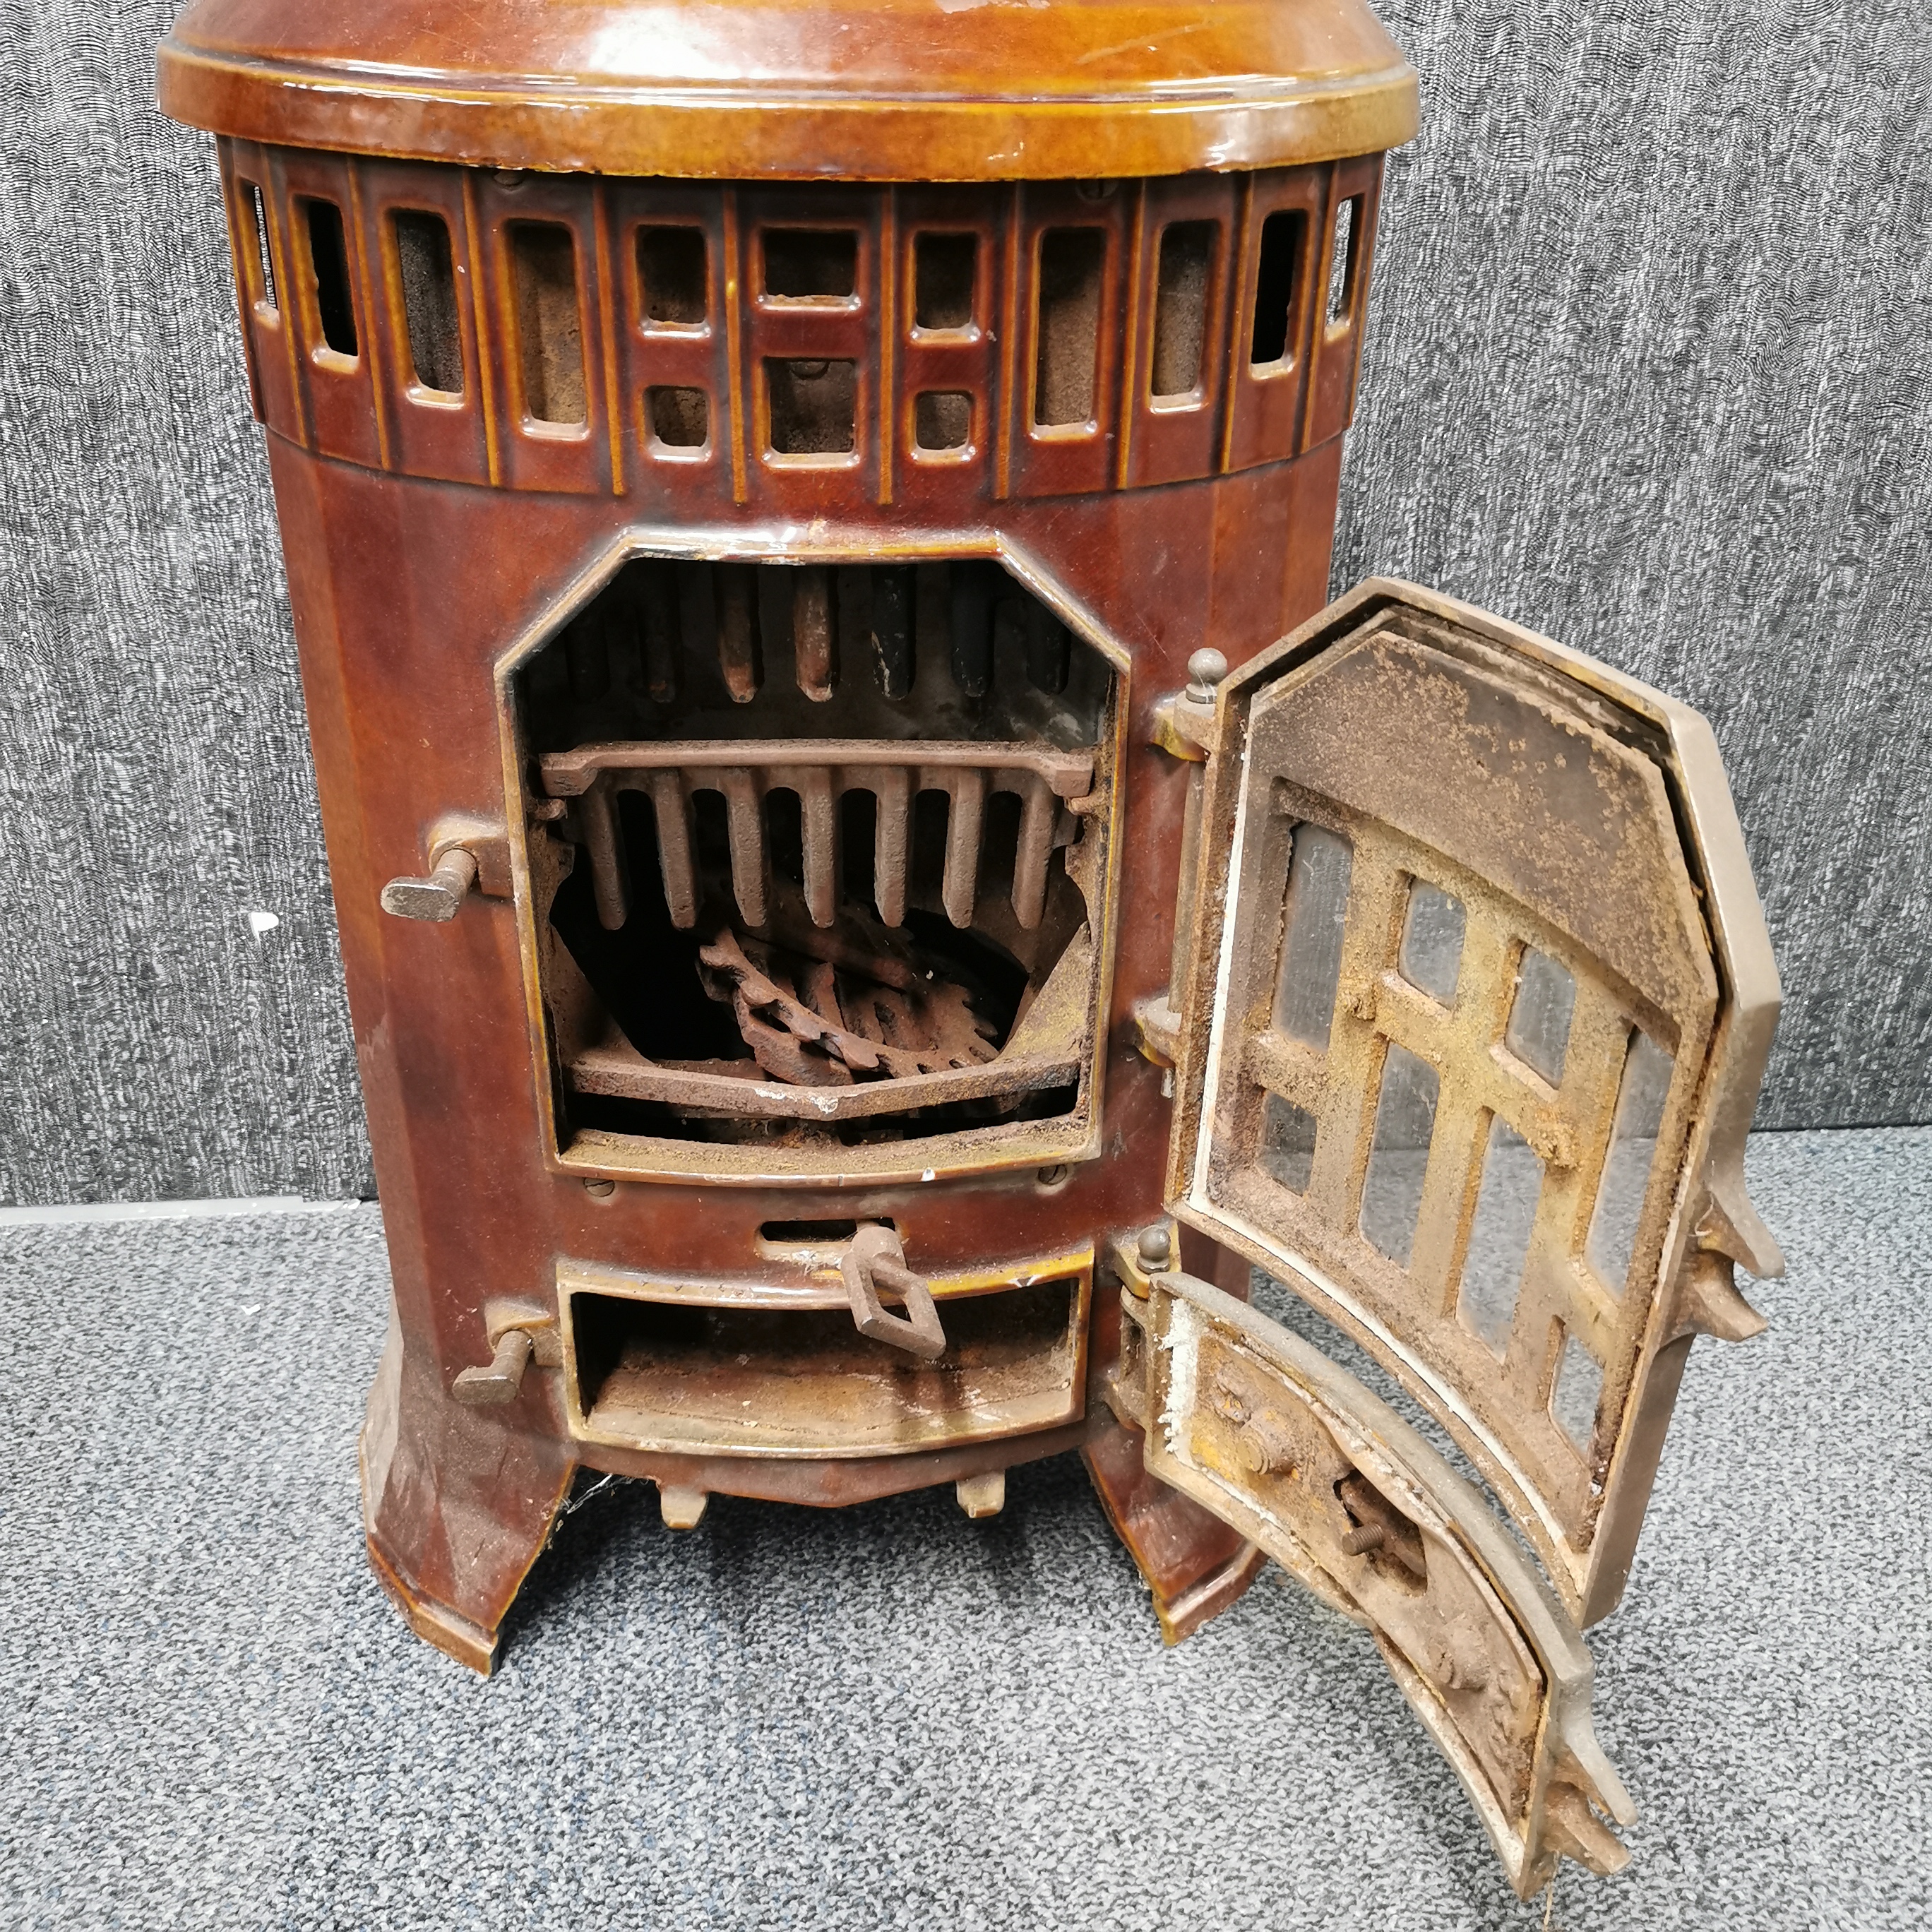 An antique French brown enamelled wood burning stove, 65 x 40 x 30cm. - Image 4 of 15